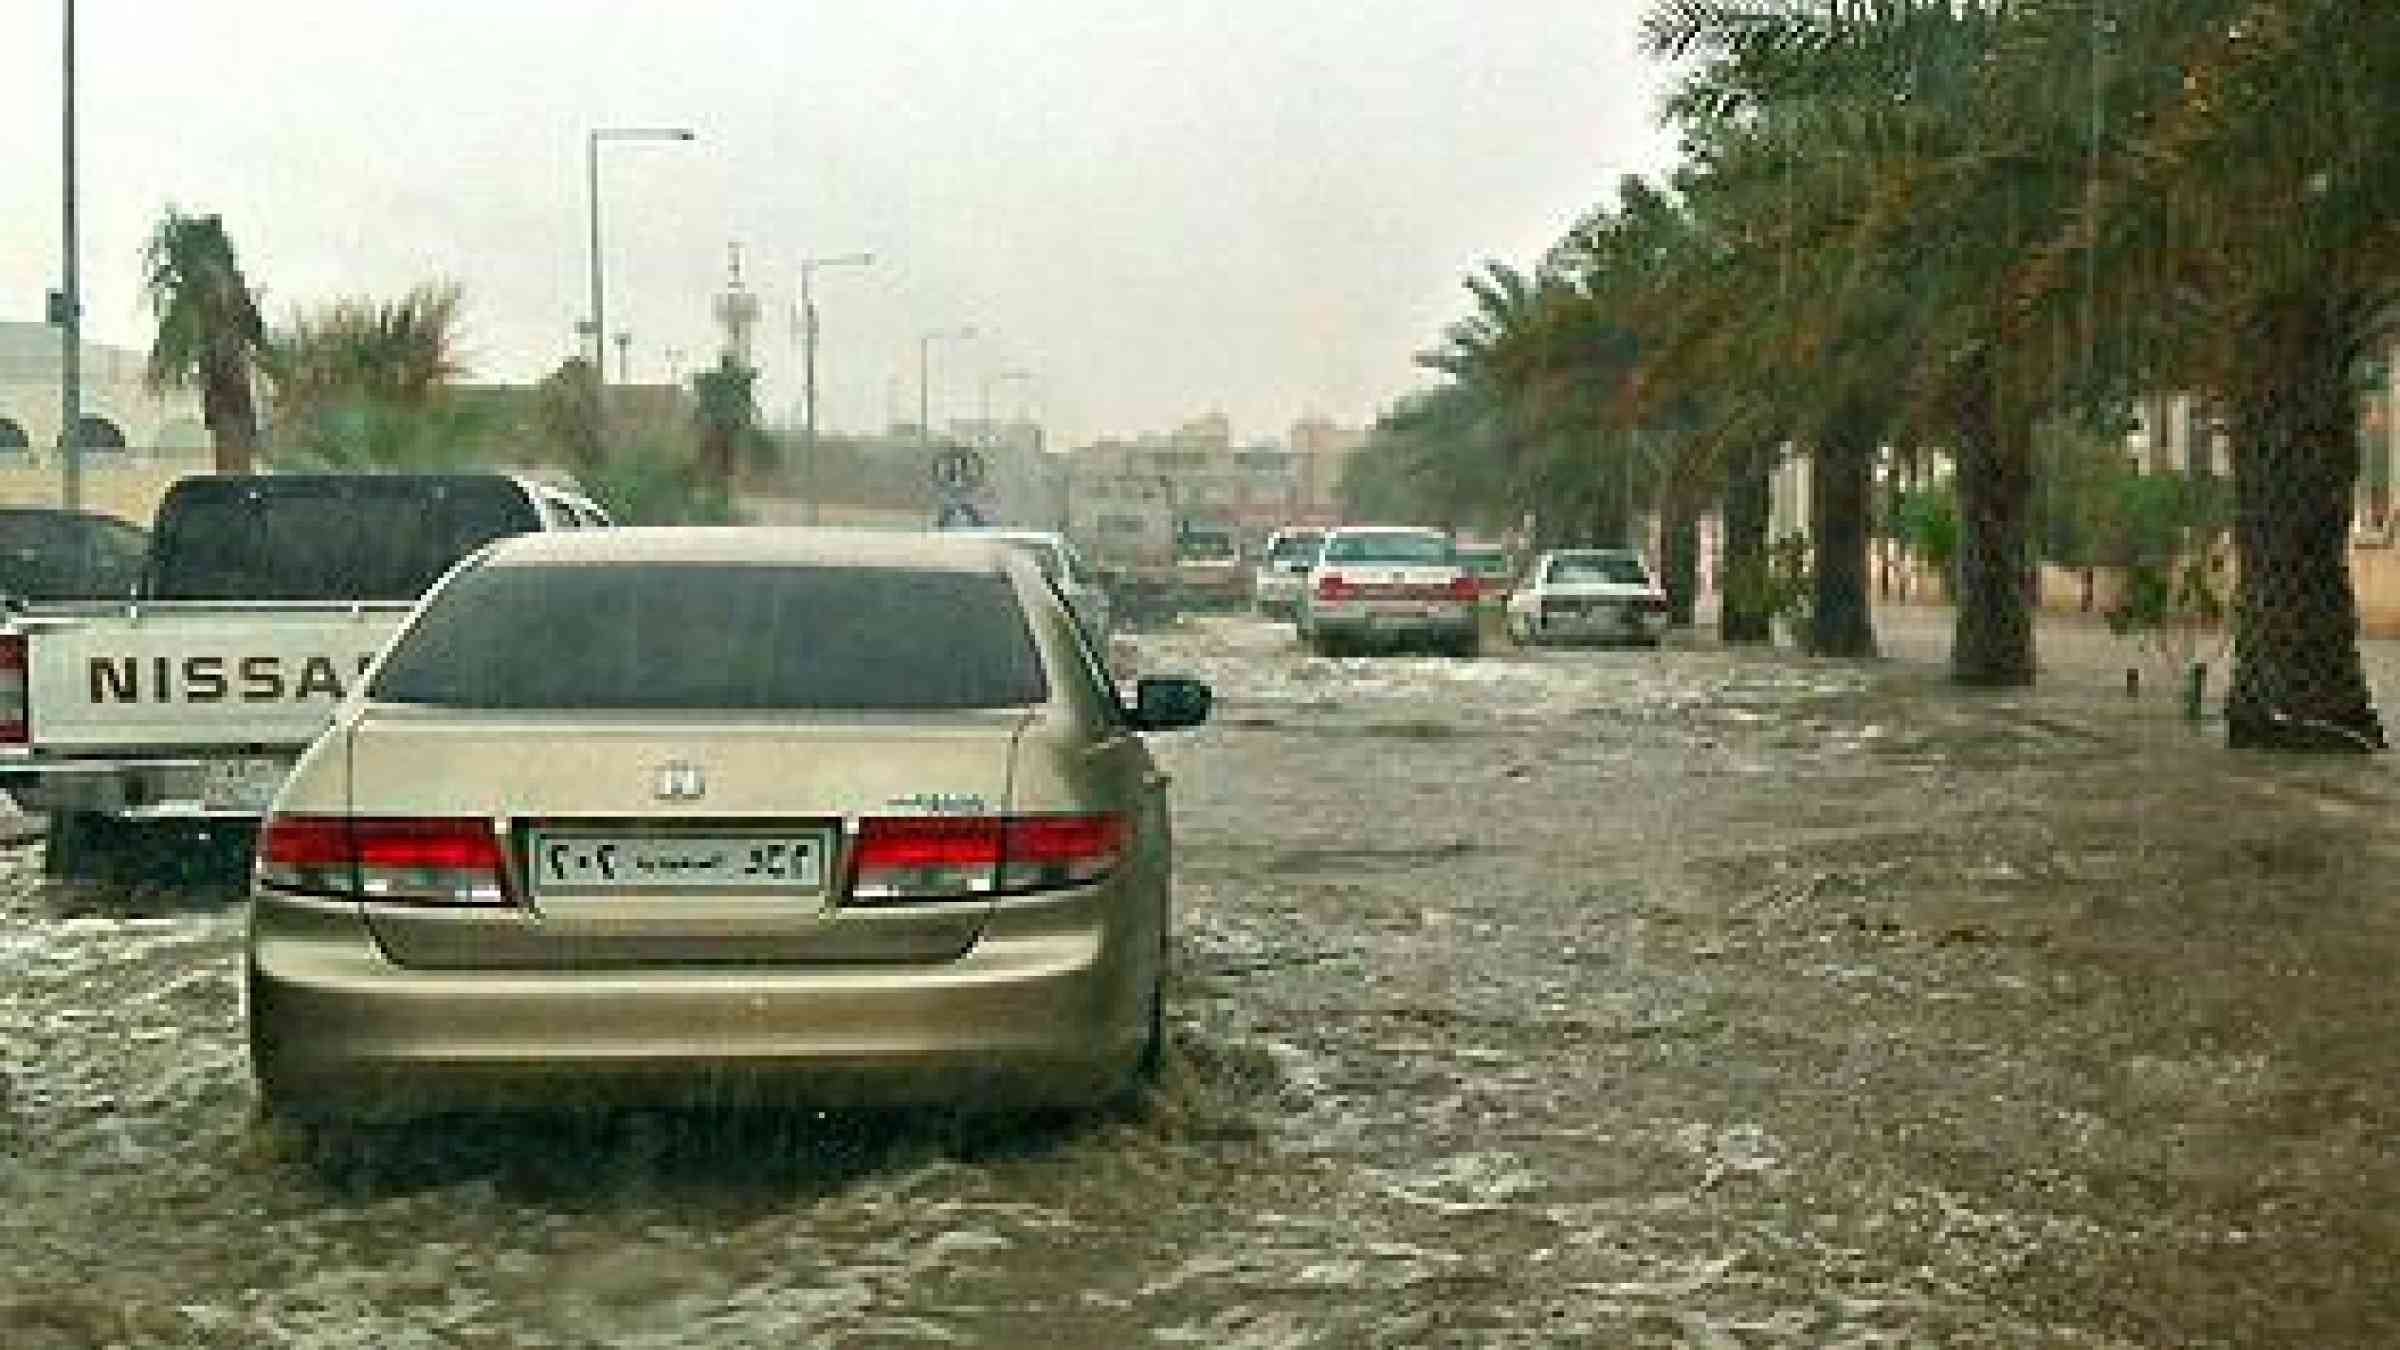 Flooding is becoming a serious concern in the Arab region.